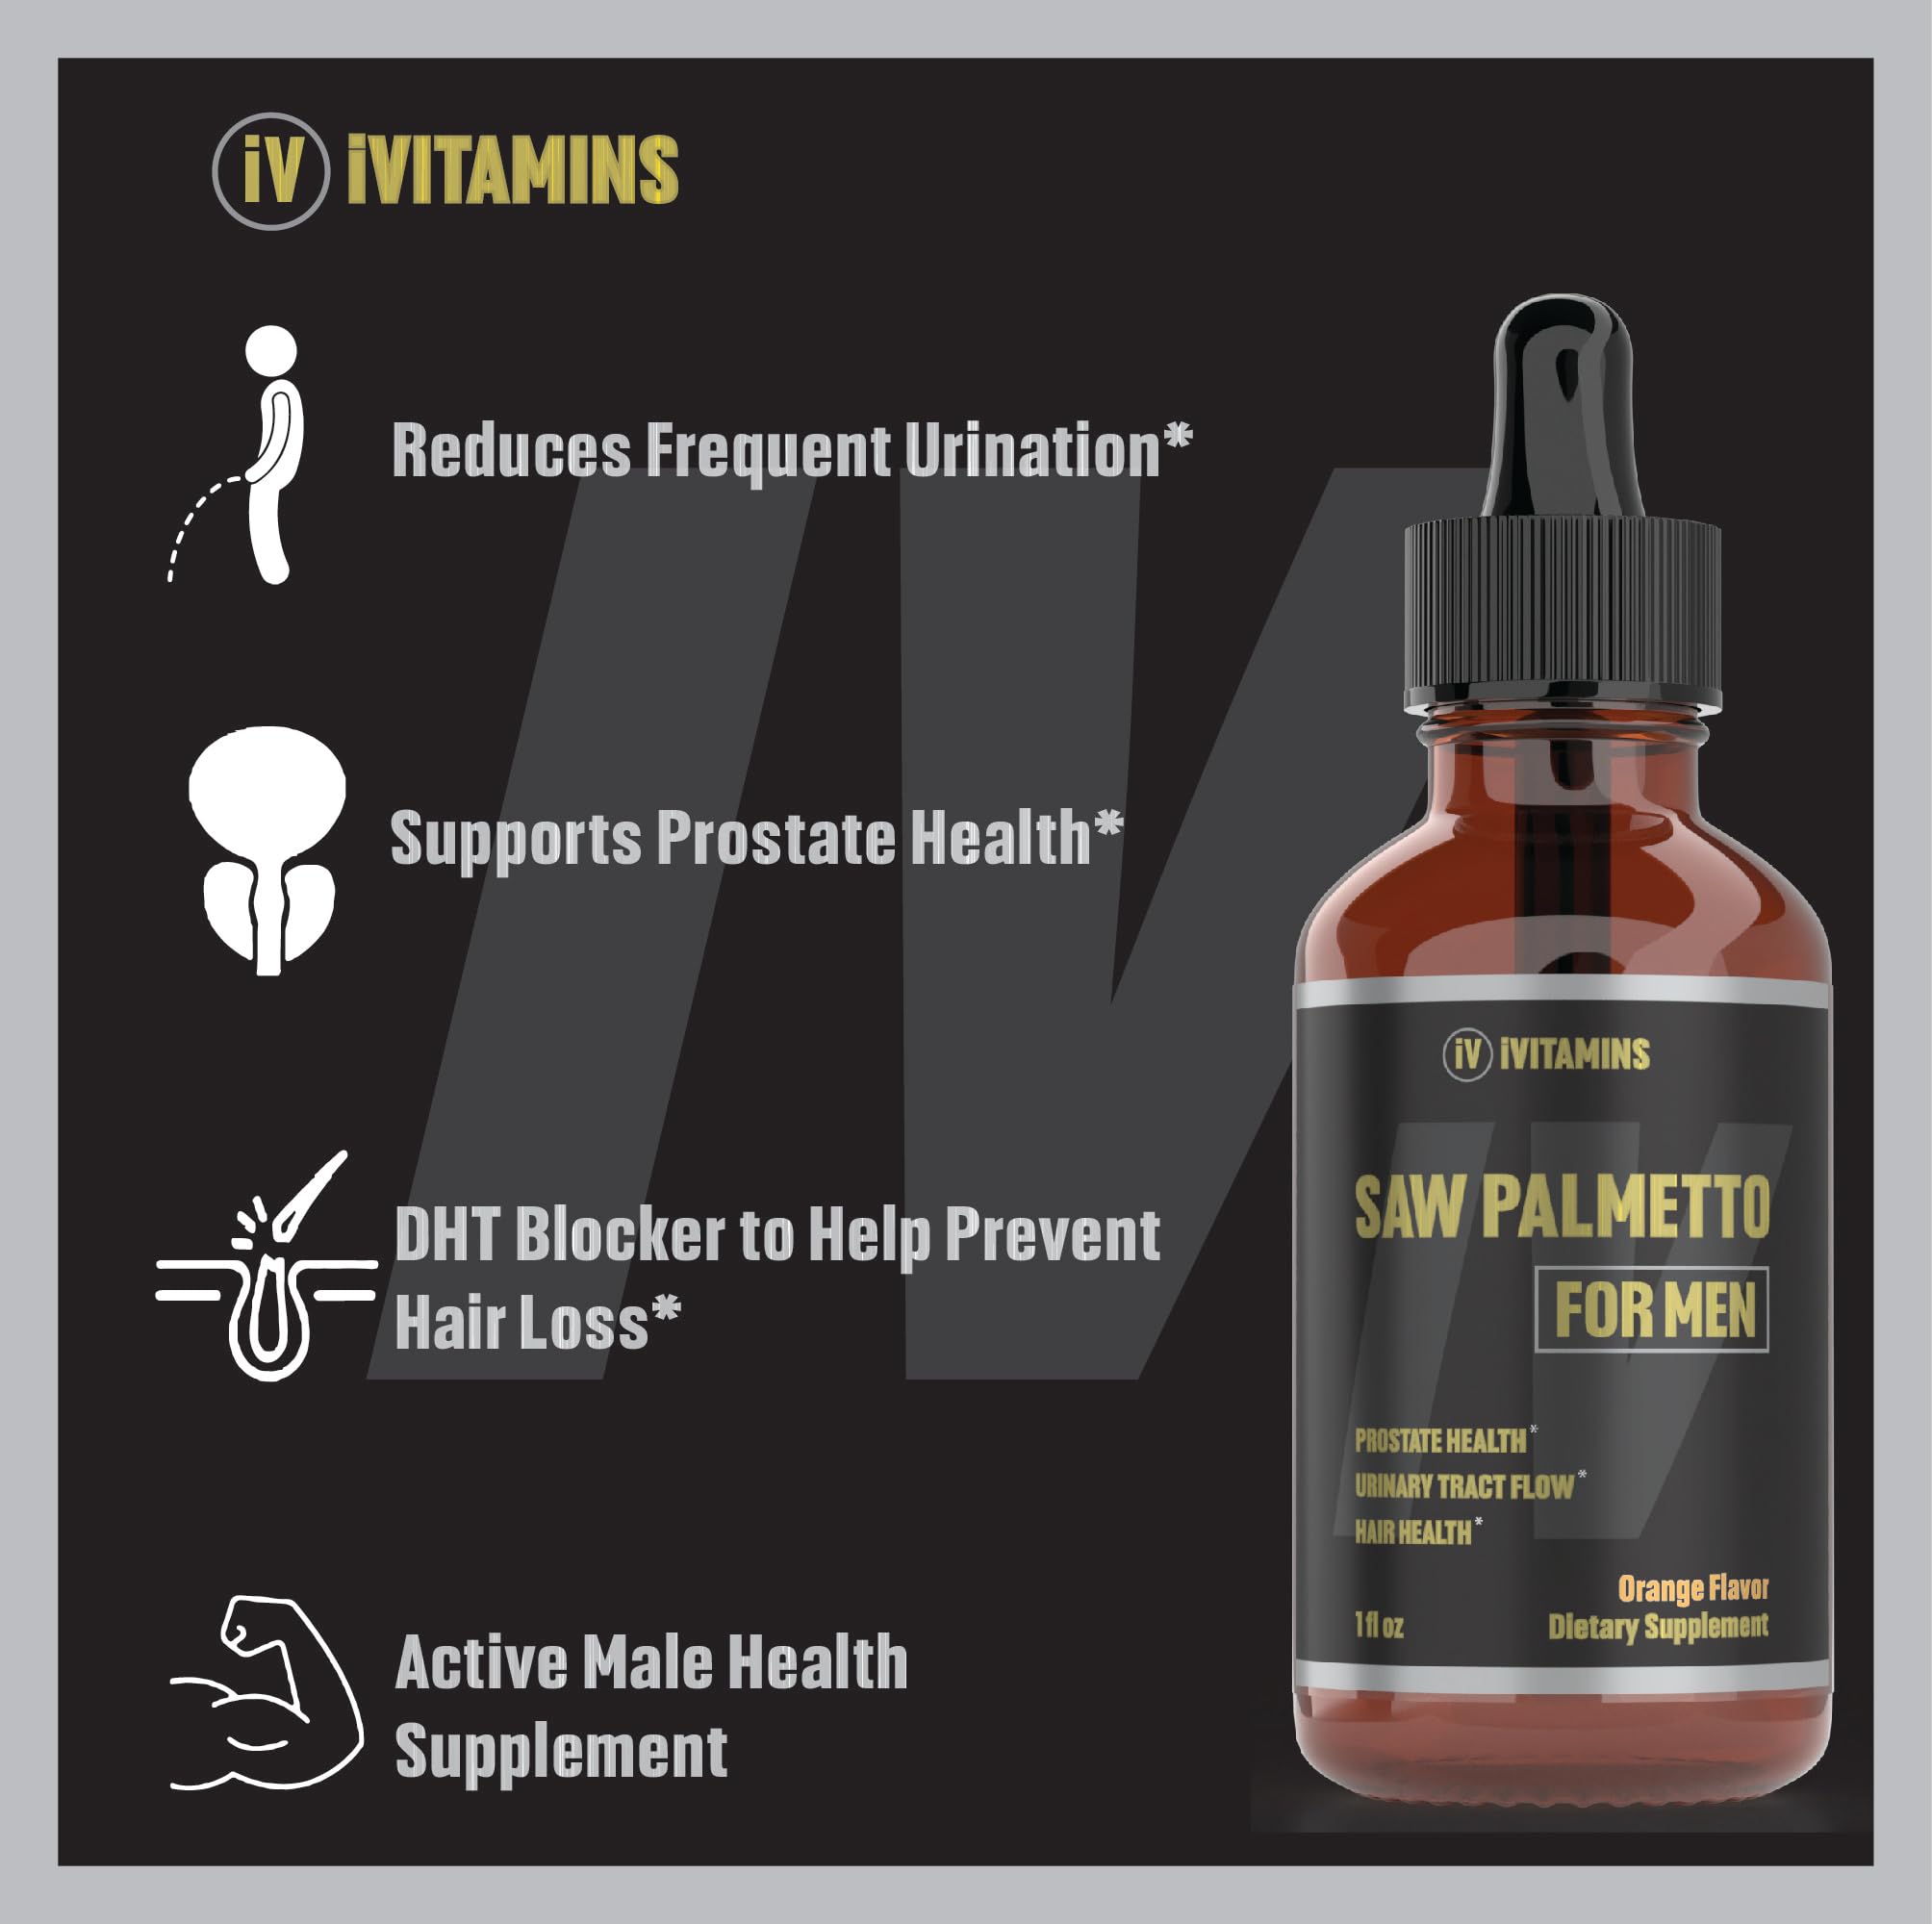 Saw Palmetto for Men | Prostate Support Supplement for Men's Health | Saw Palmetto Supplement | DHT Blocker for Men | Prostate Supplement | Prostate Supplements | Prostate Supplements for Men | 1 oz